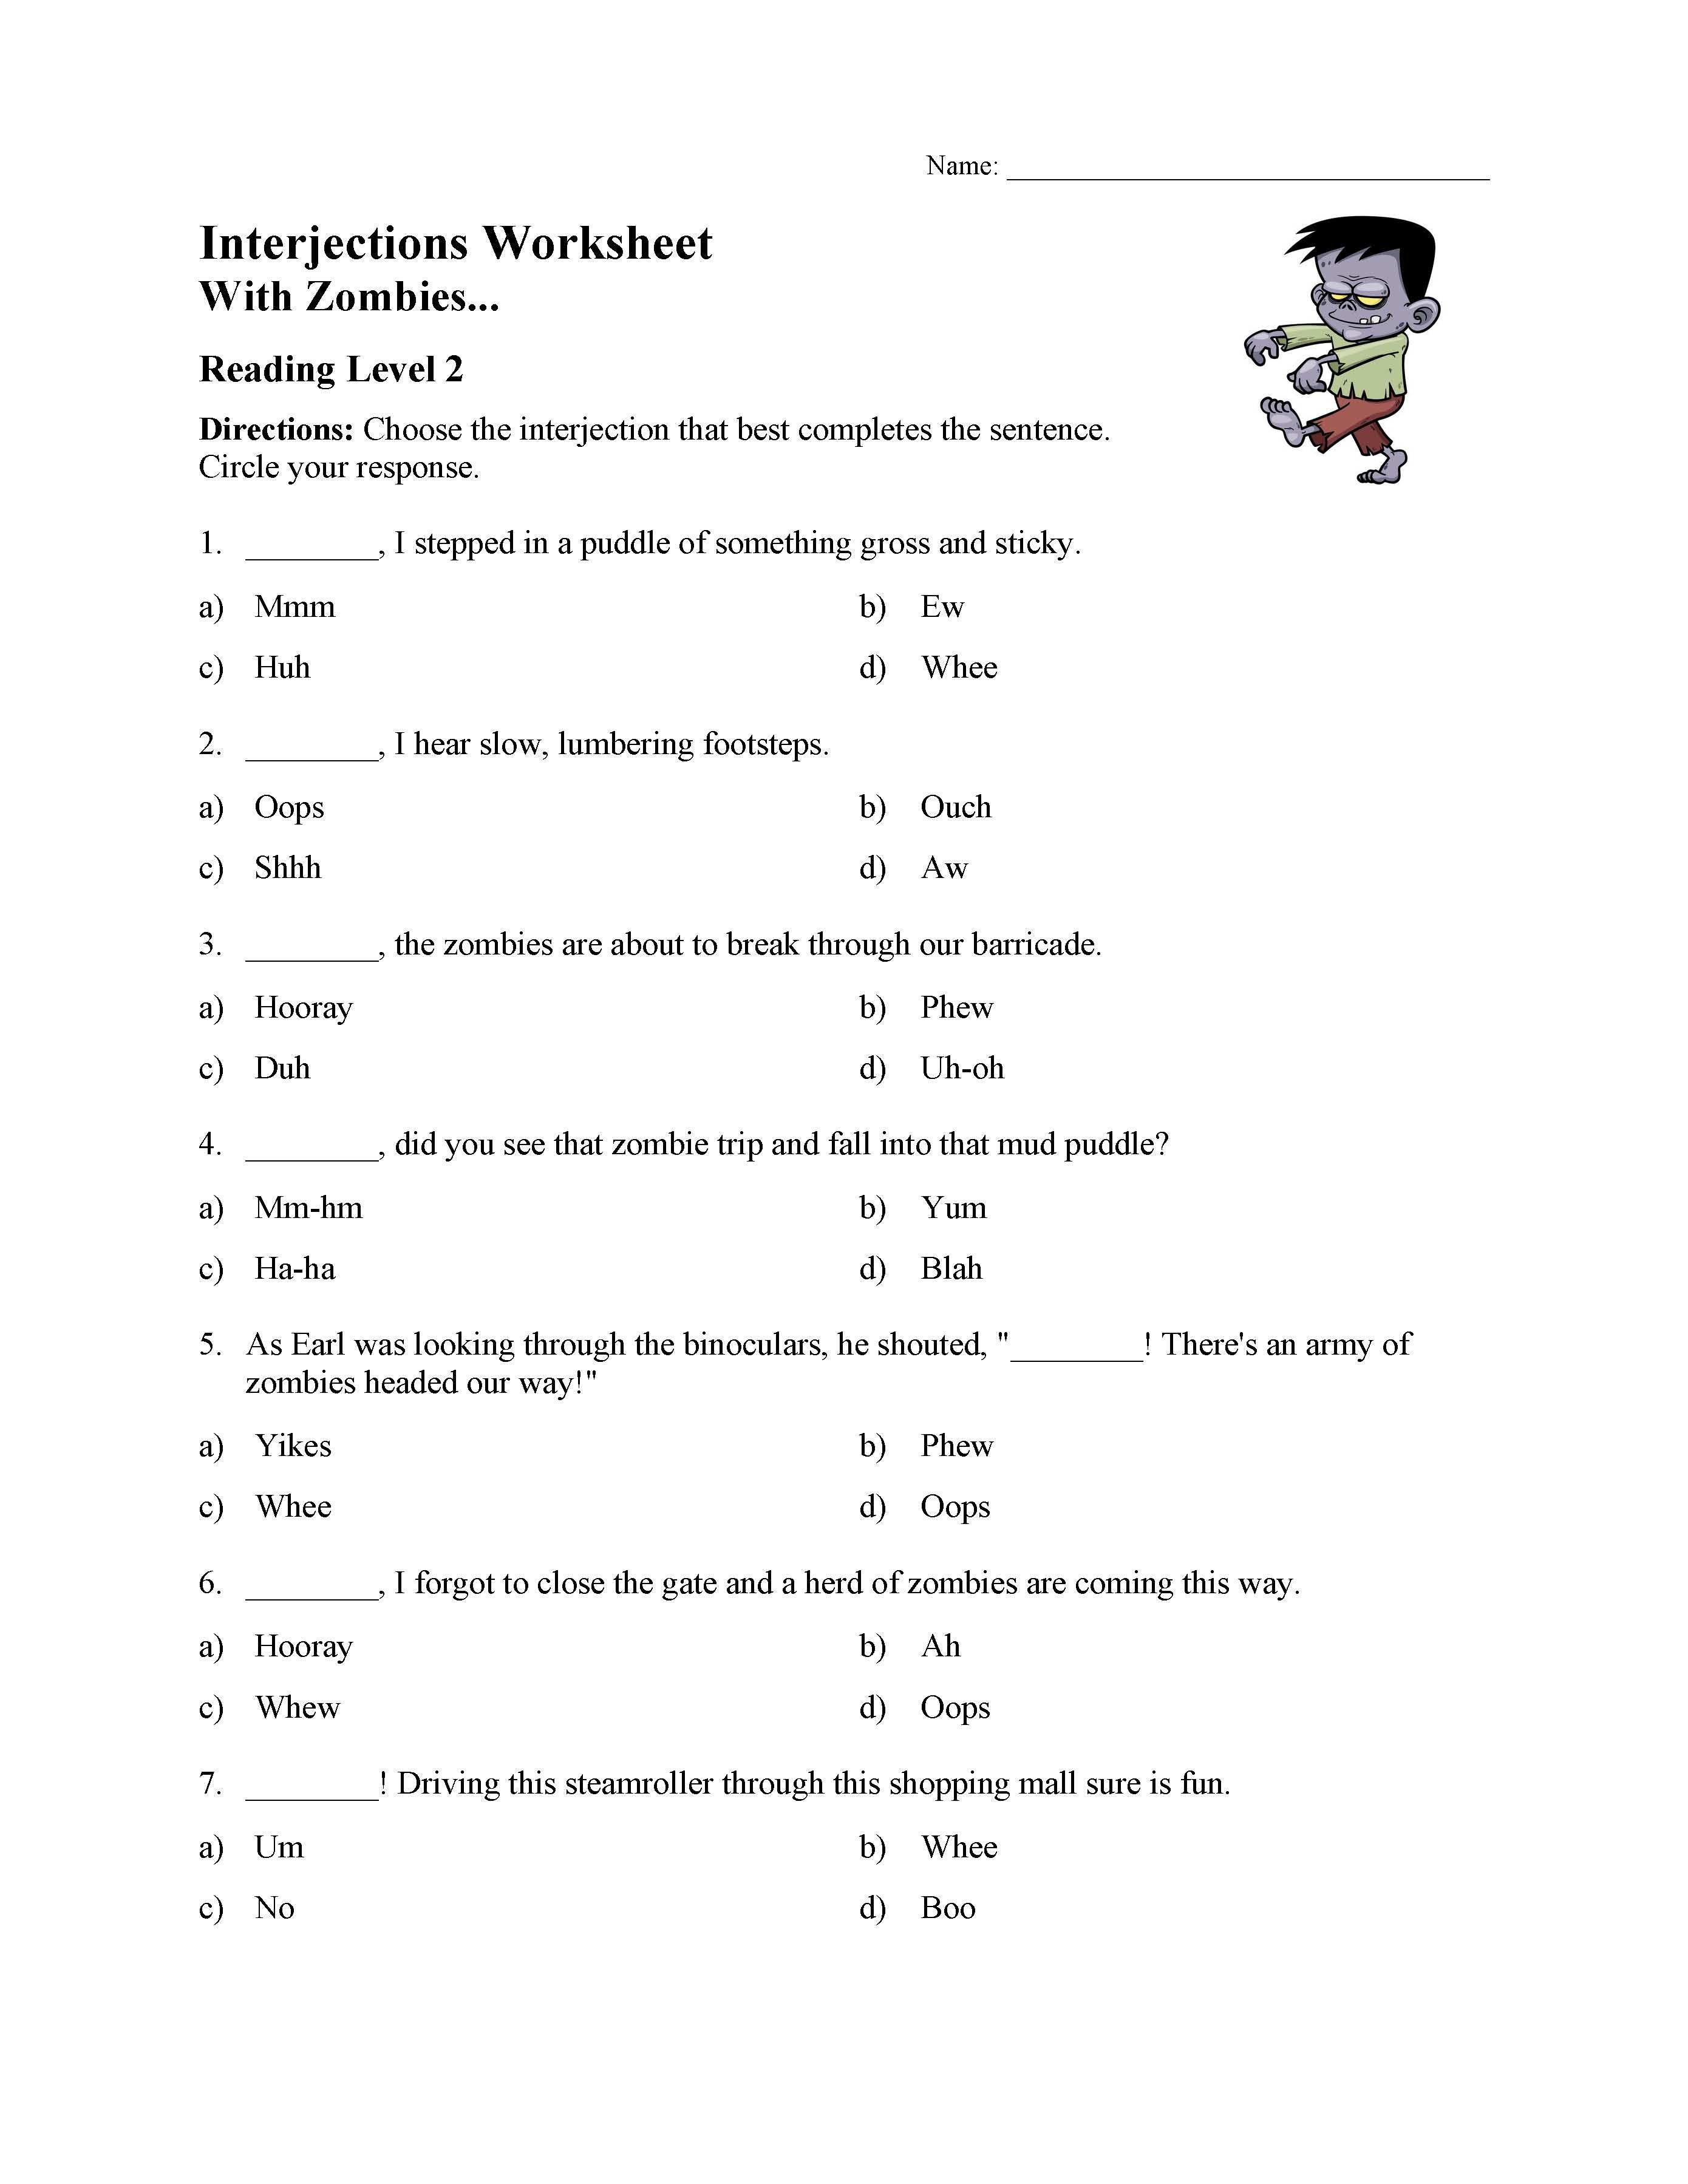 This is a preview image of the Interjections Worksheet - Reading Level 2.